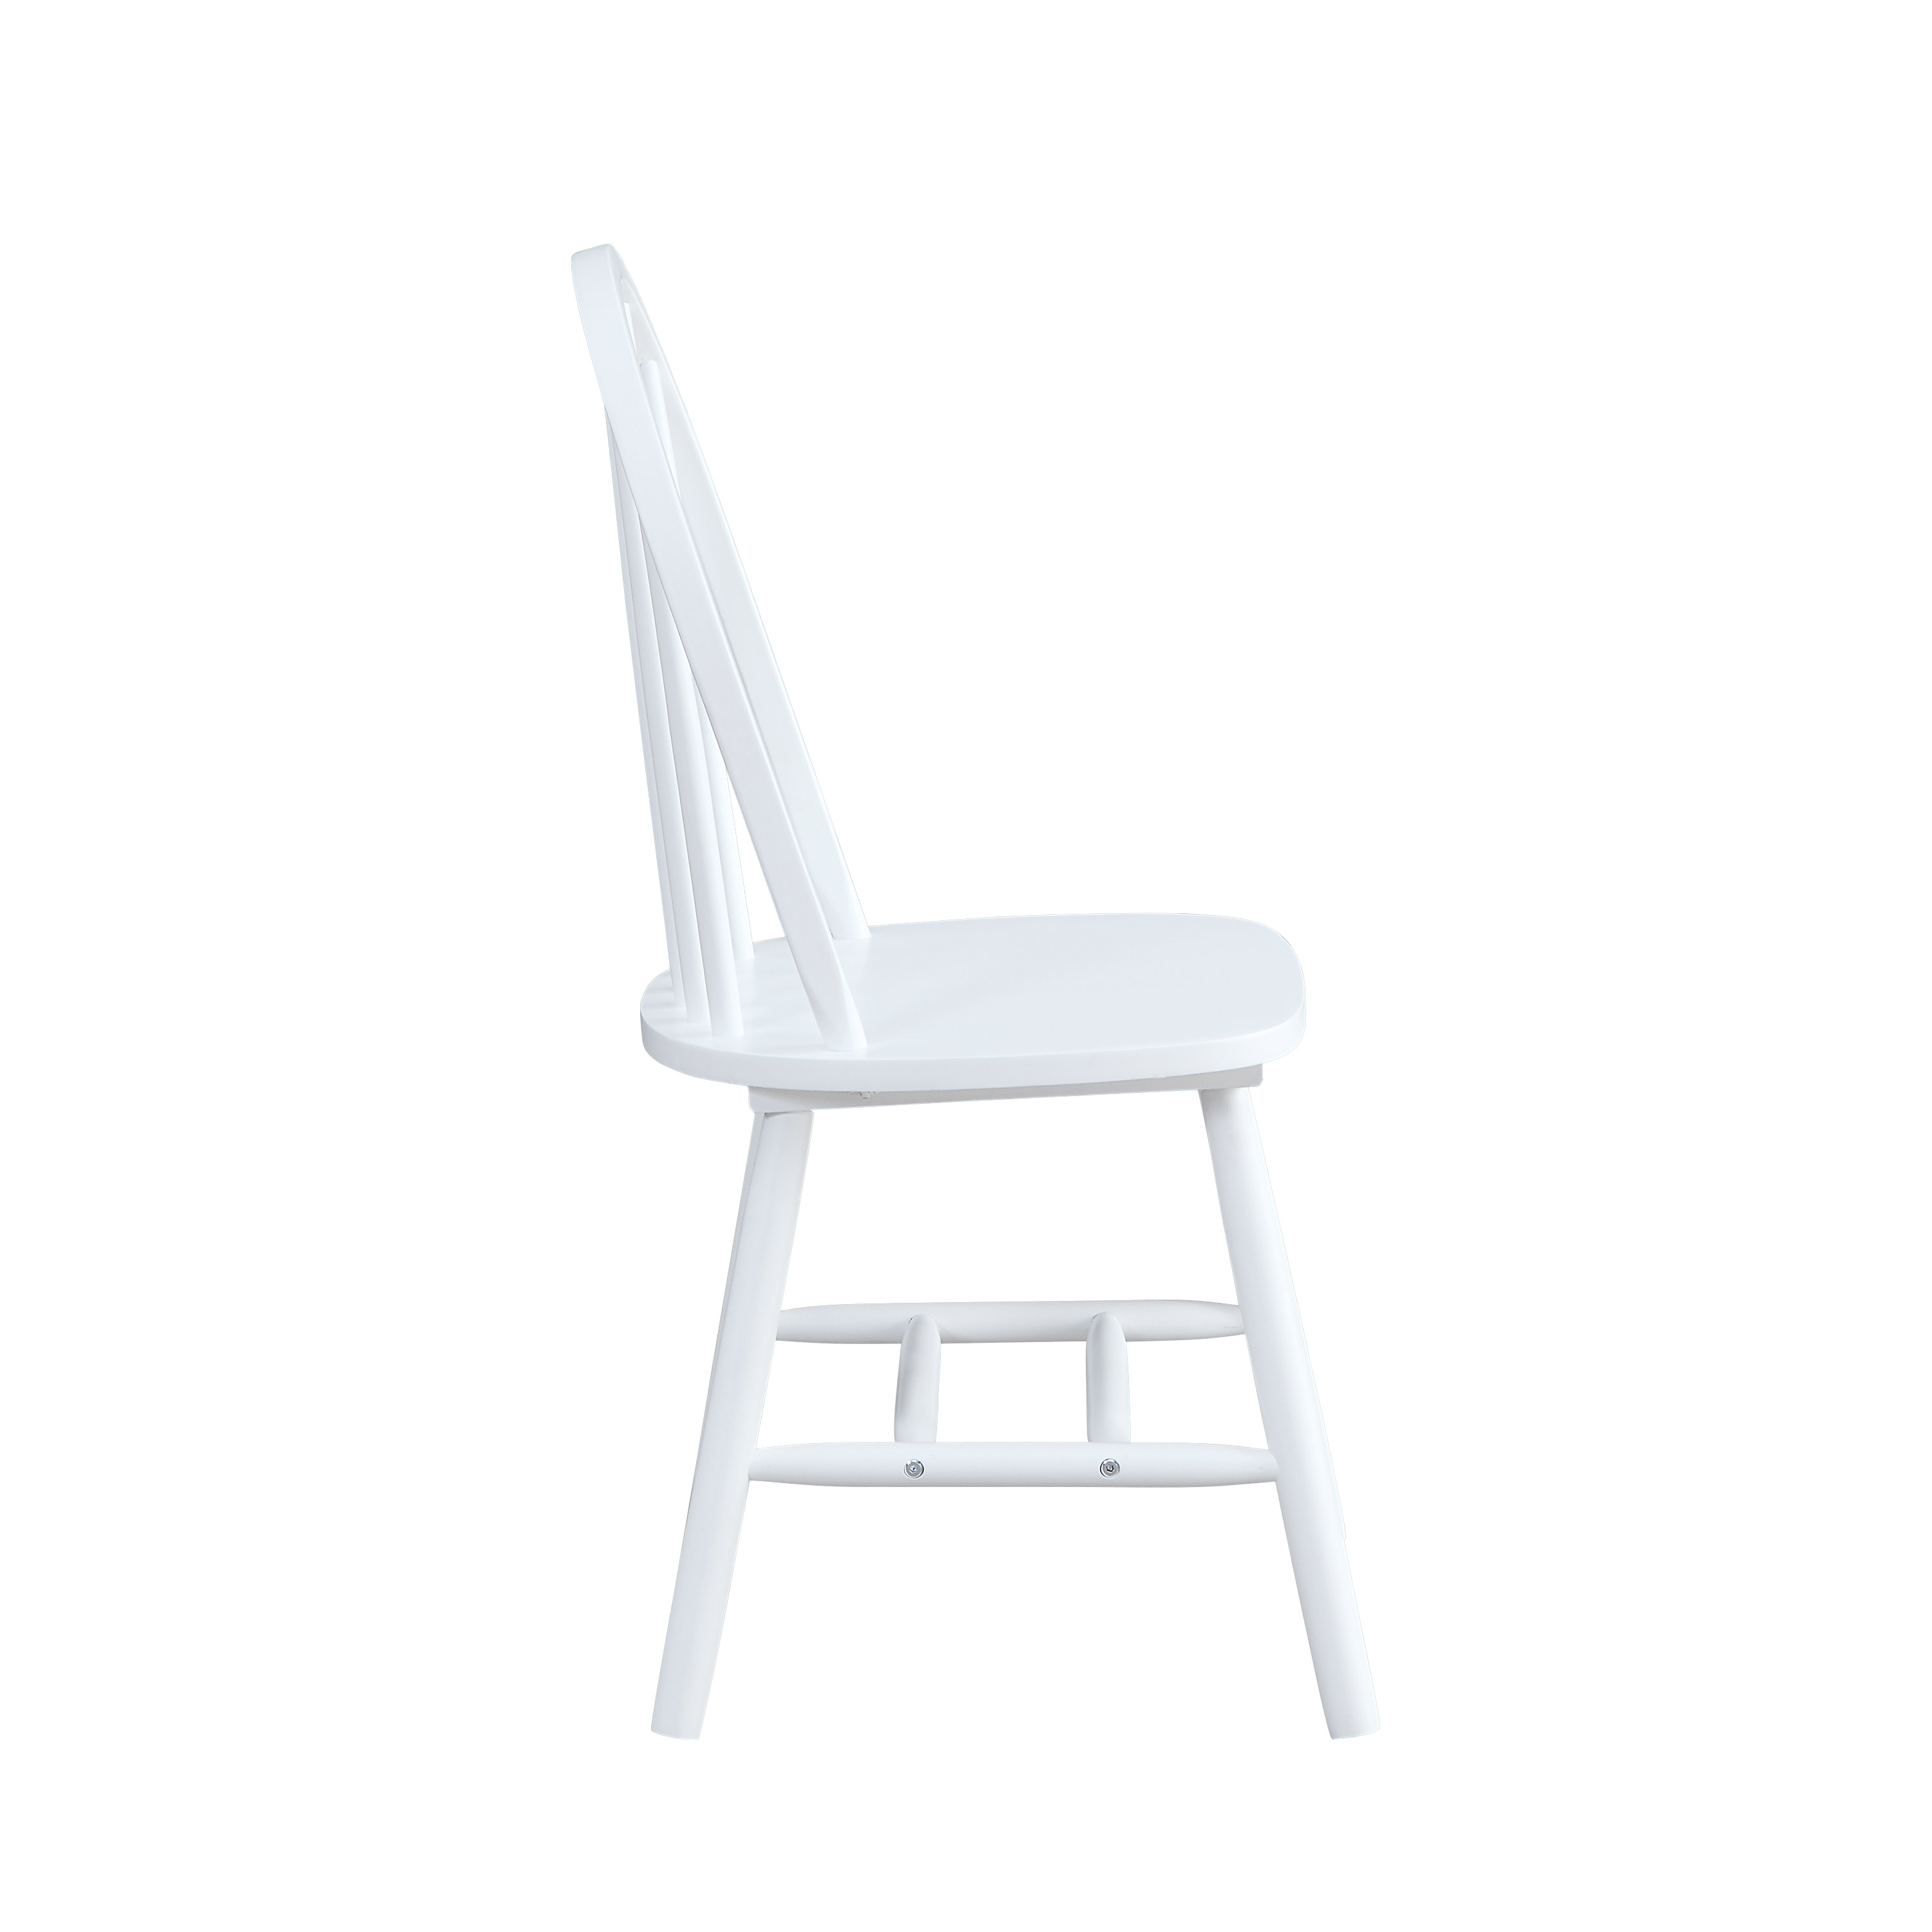 Better Homes and Gardens Autumn Lane Windsor Solid Wood Dining Chairs, Set of 2, Solid White - image 3 of 10